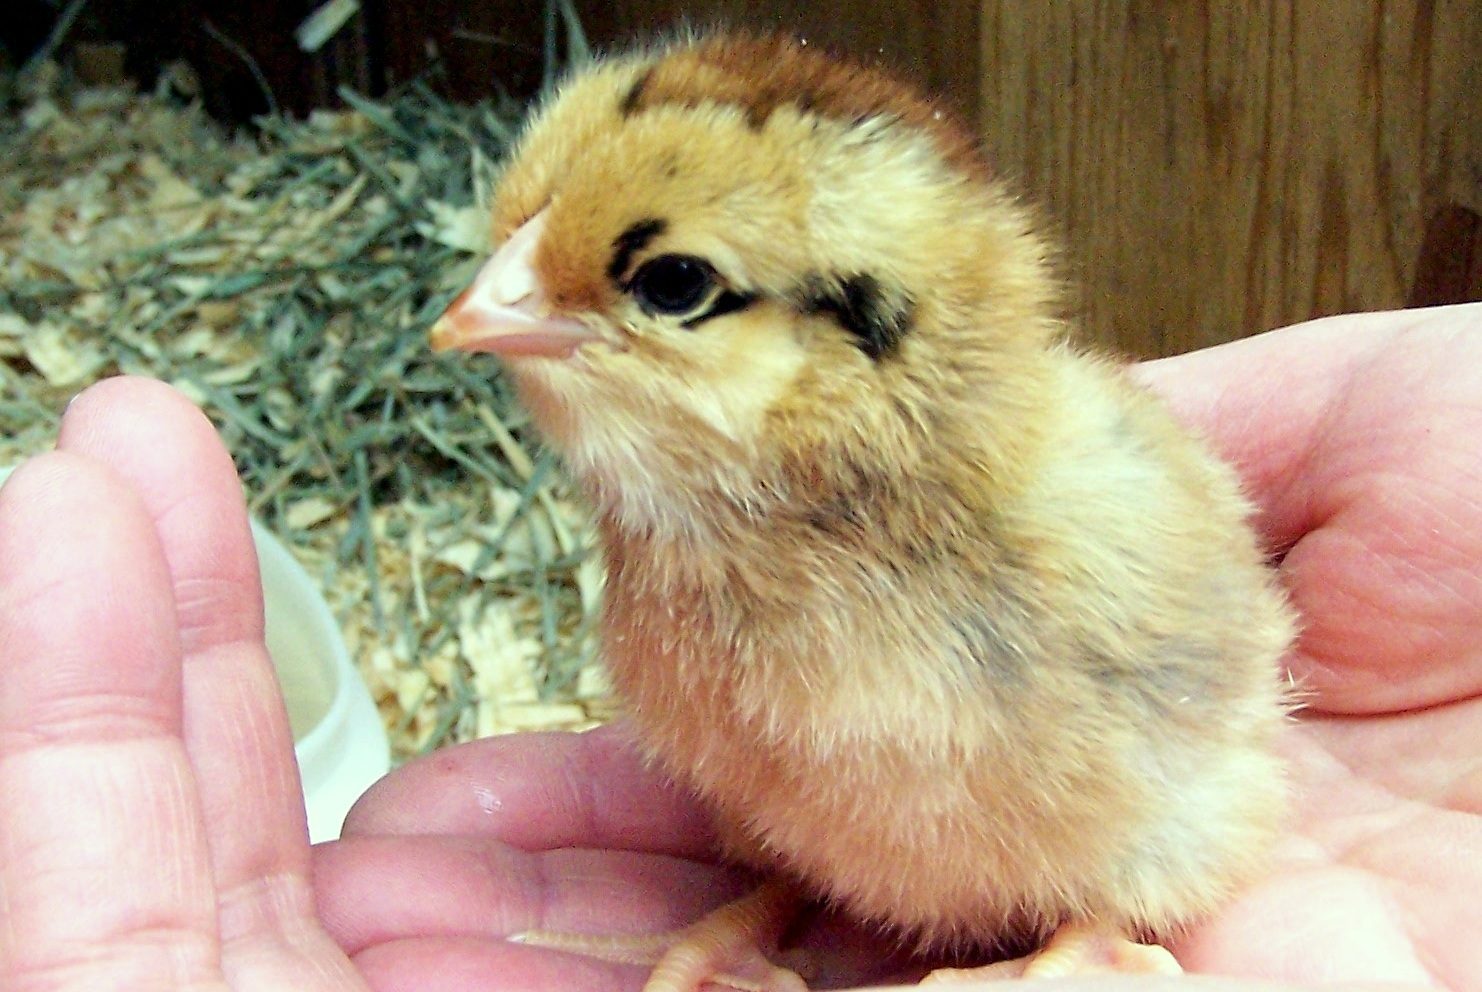 Ms. Marvel as a chick (June 2013 brood from a mystery bag of eggs)